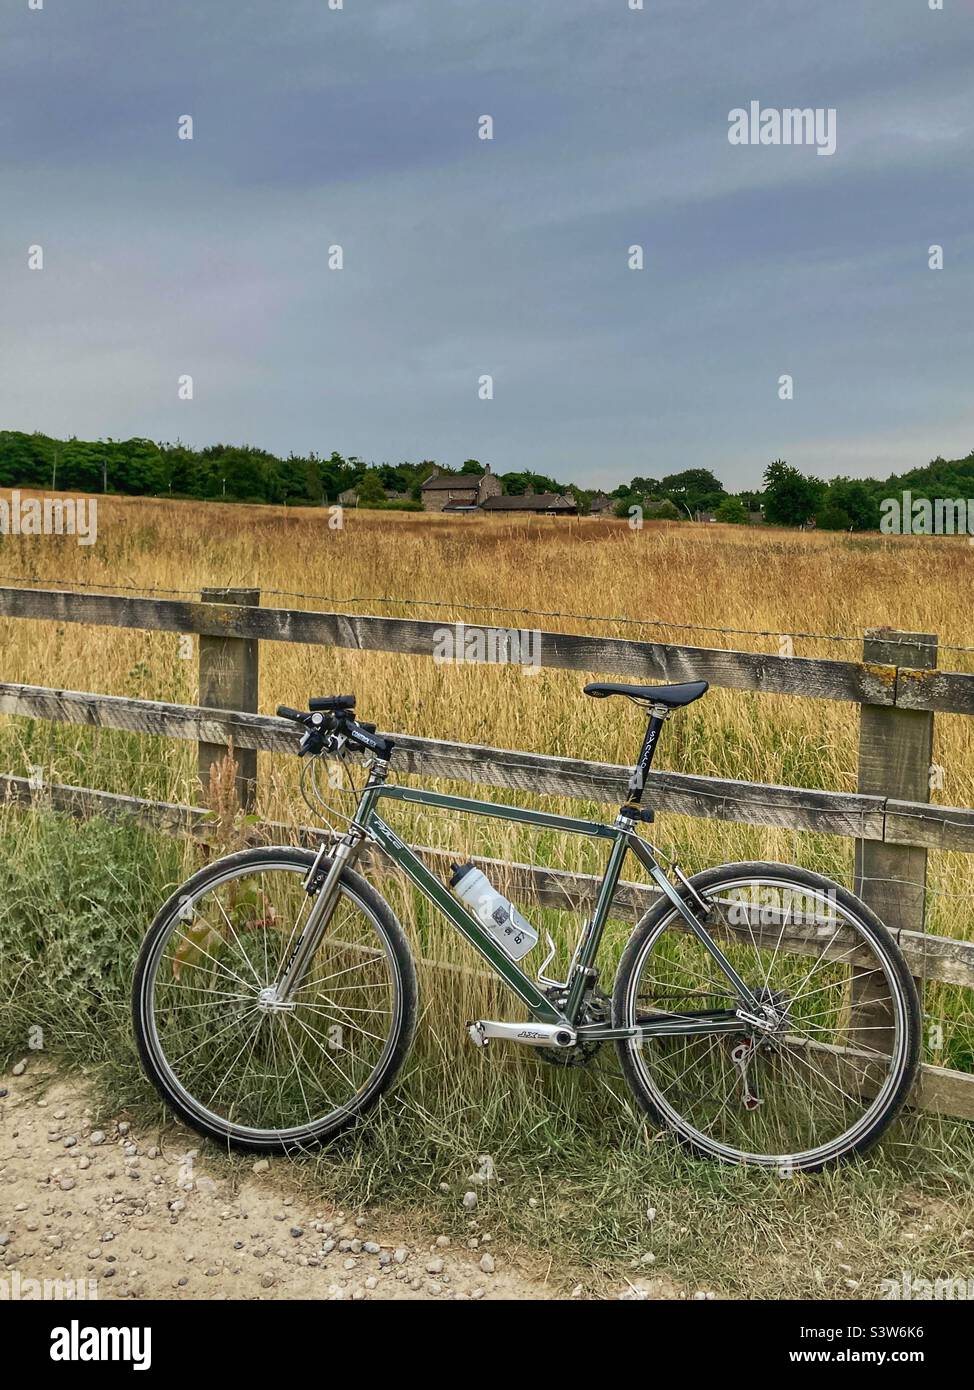 Bicycle at the ITV Emmerdale village Stock Photo